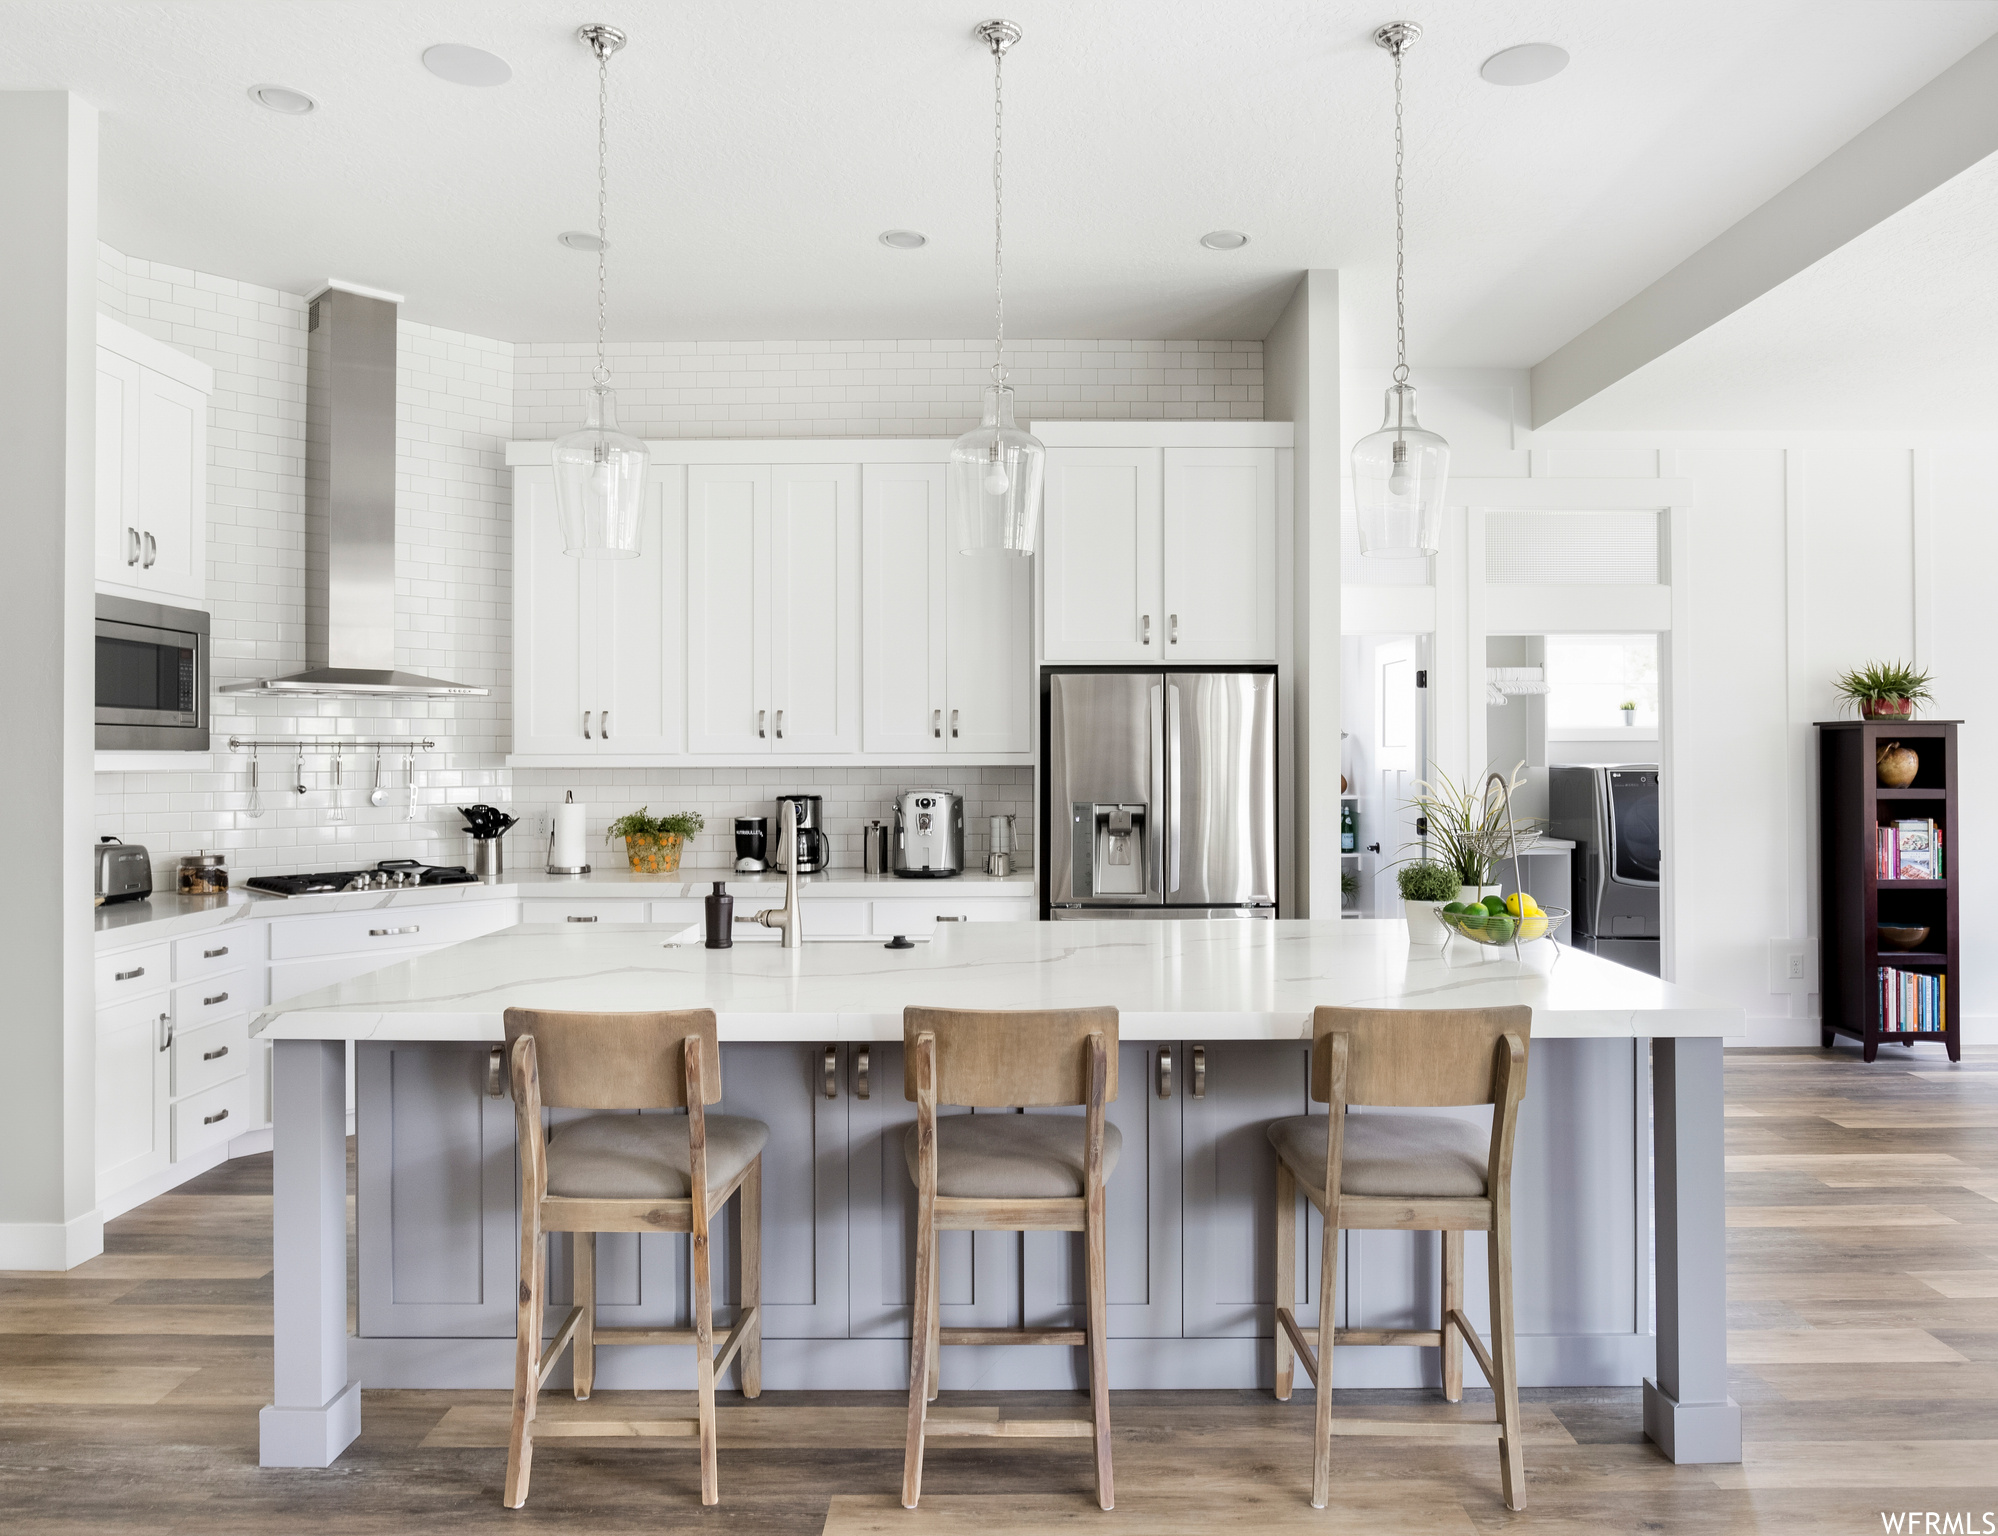 Kitchen featuring wall chimney exhaust hood, hardwood / wood-style flooring, appliances with stainless steel finishes, white cabinets, and a center island with sink